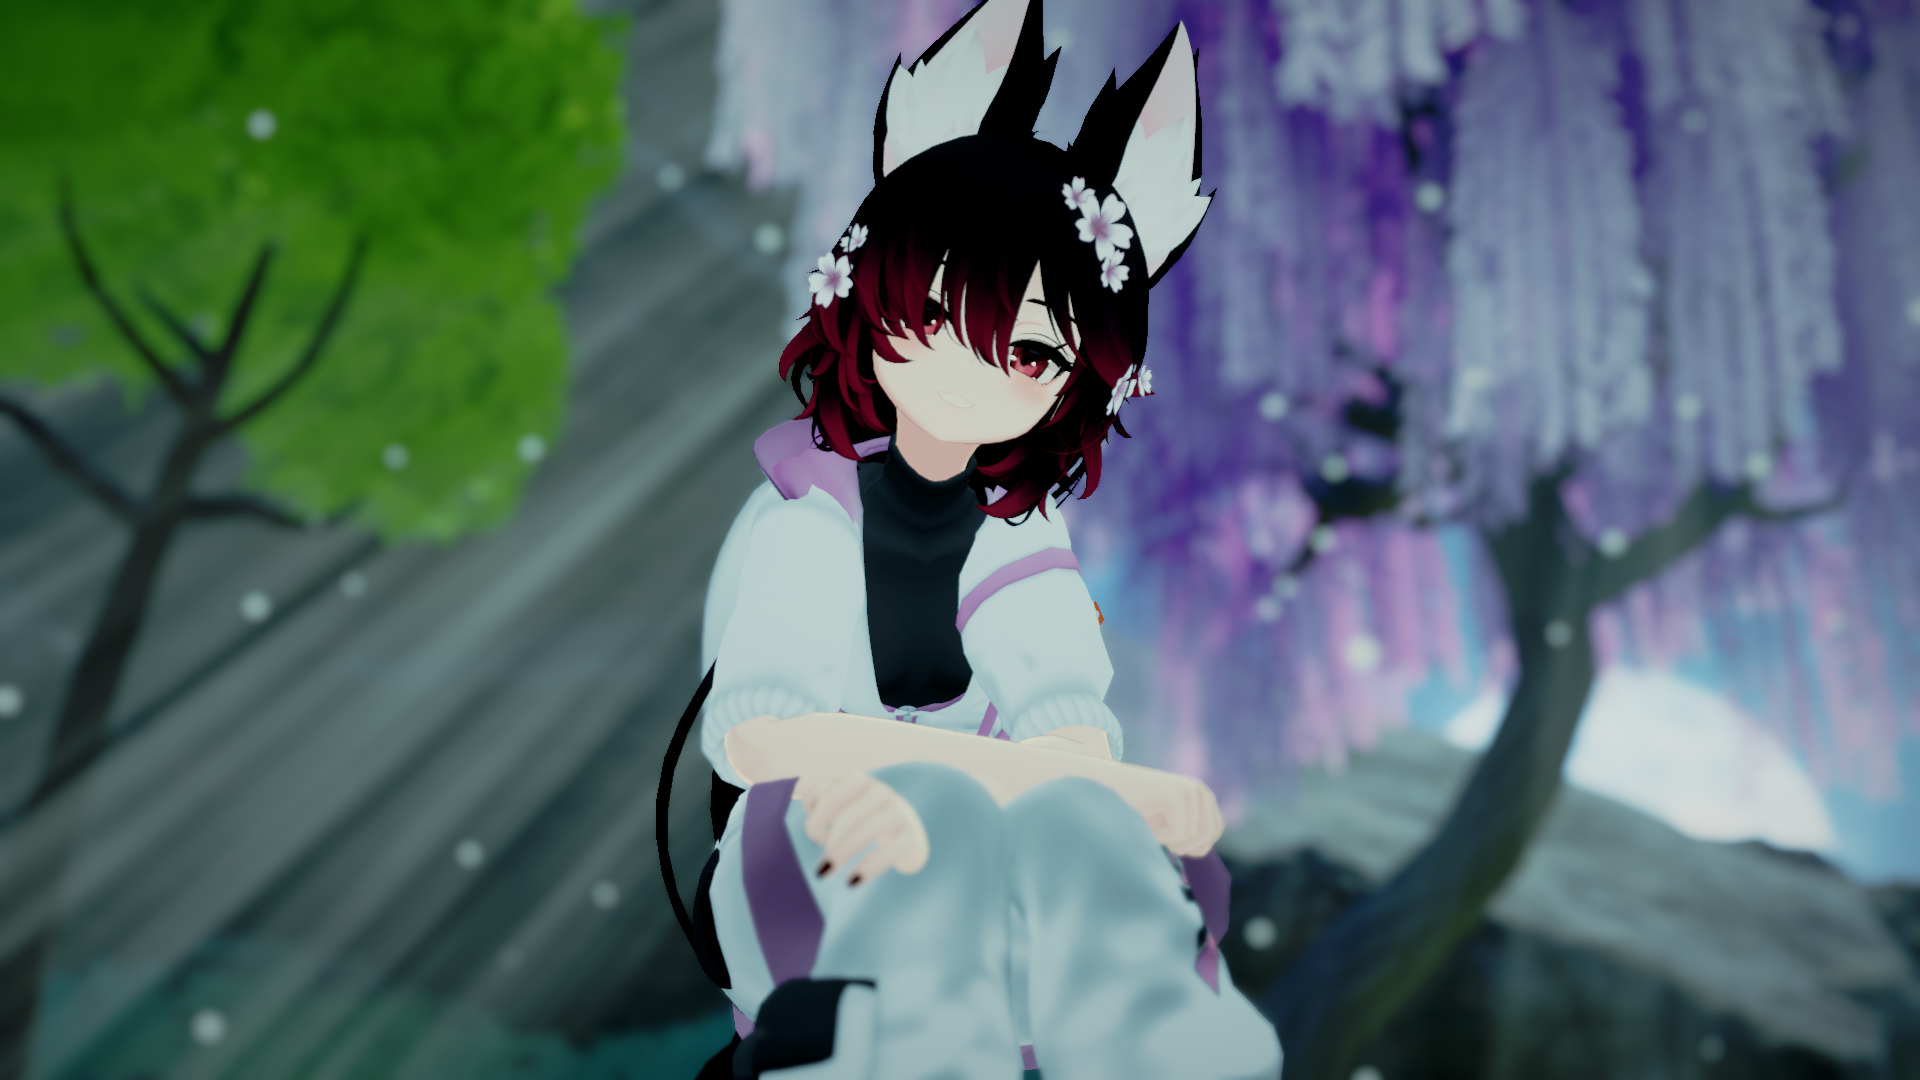 VRChat_2023-03-25_18-20-54.109_1920x1080.png